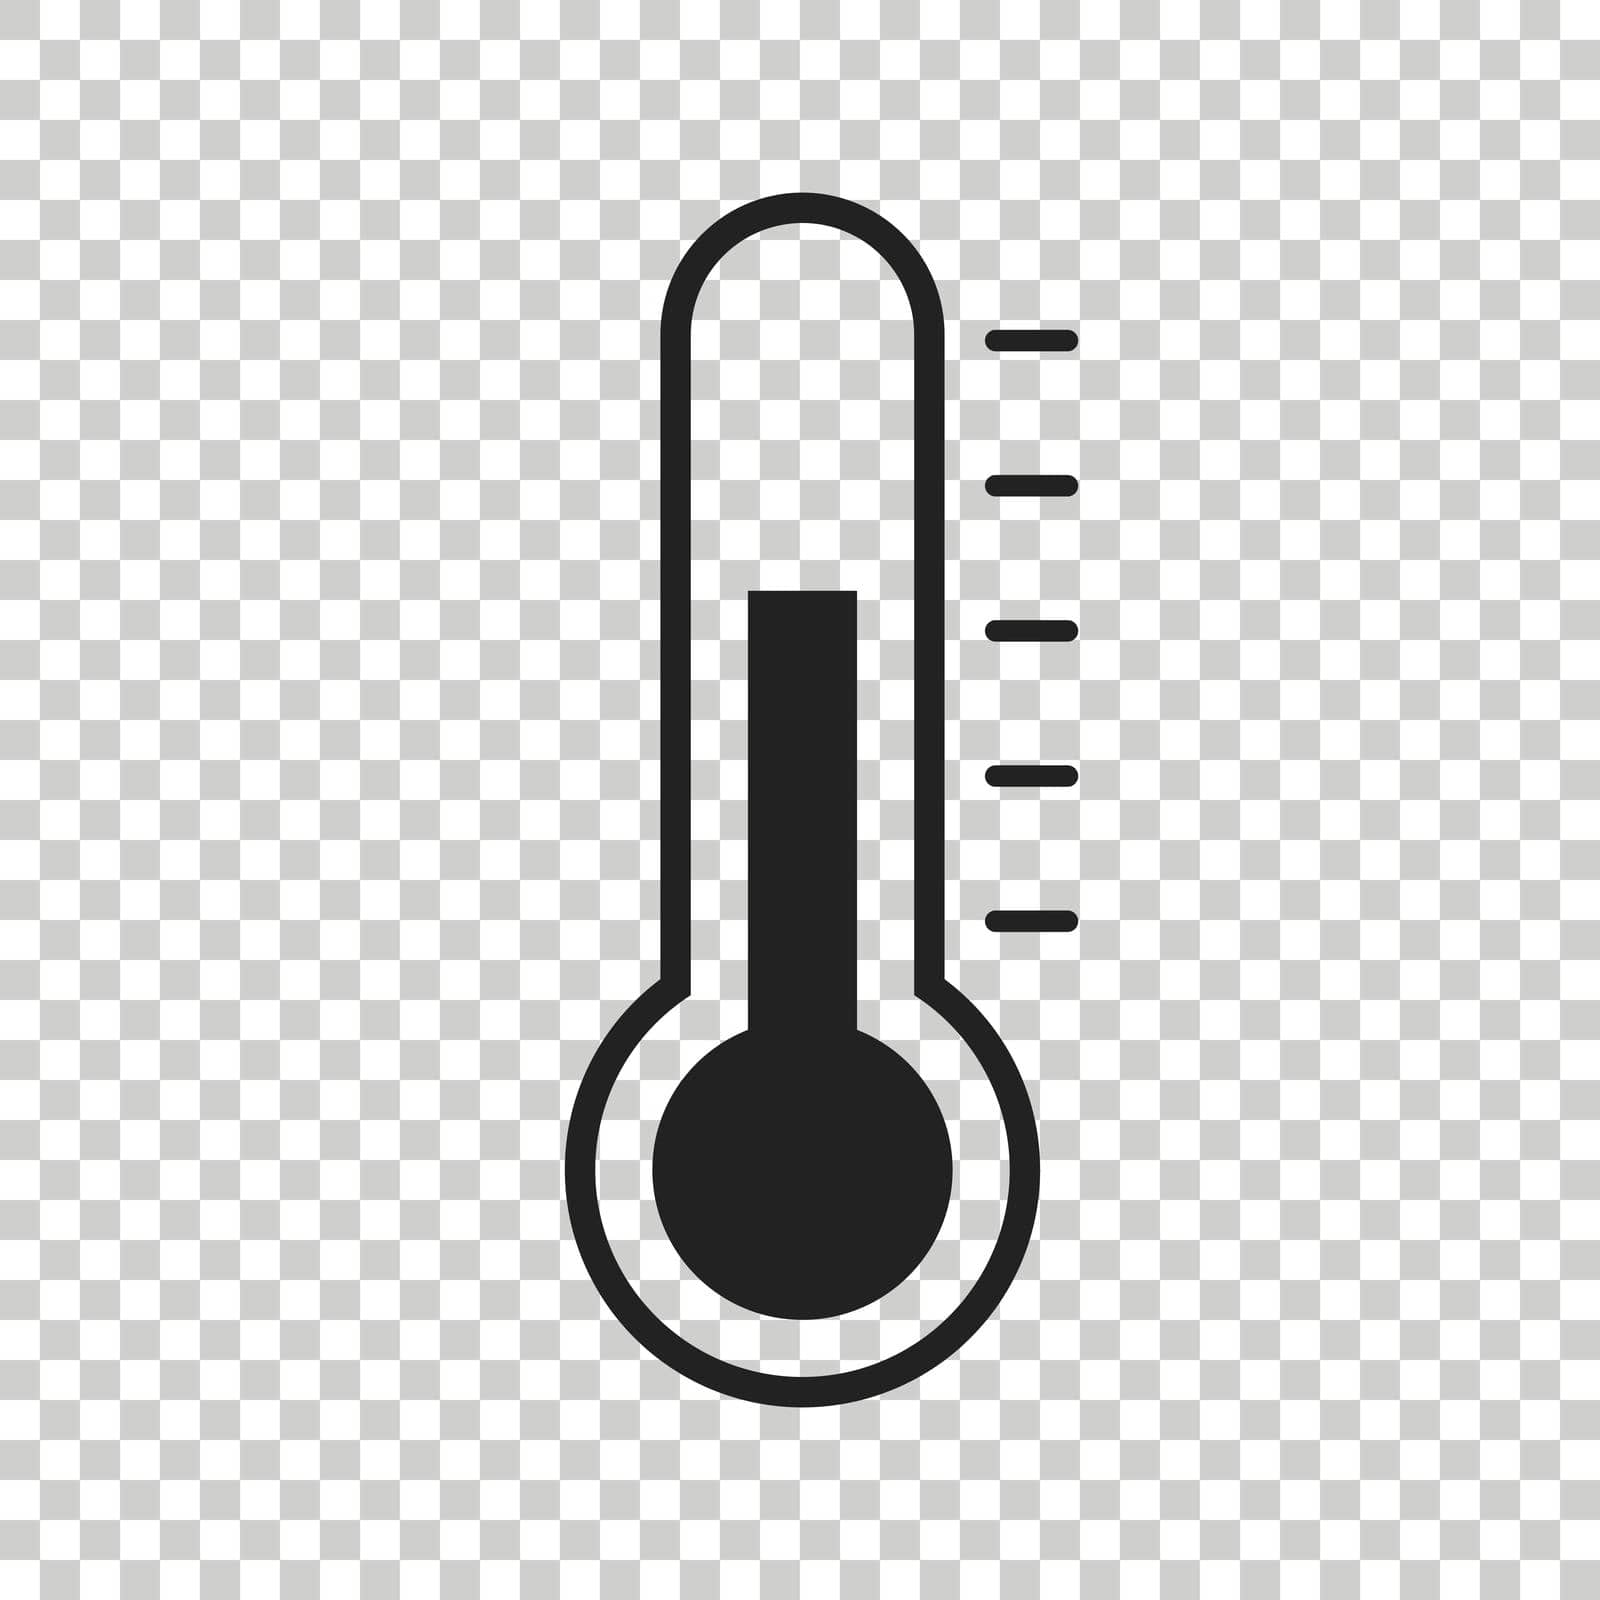 Thermometer icon. Goal flat vector illustration on isolated background.